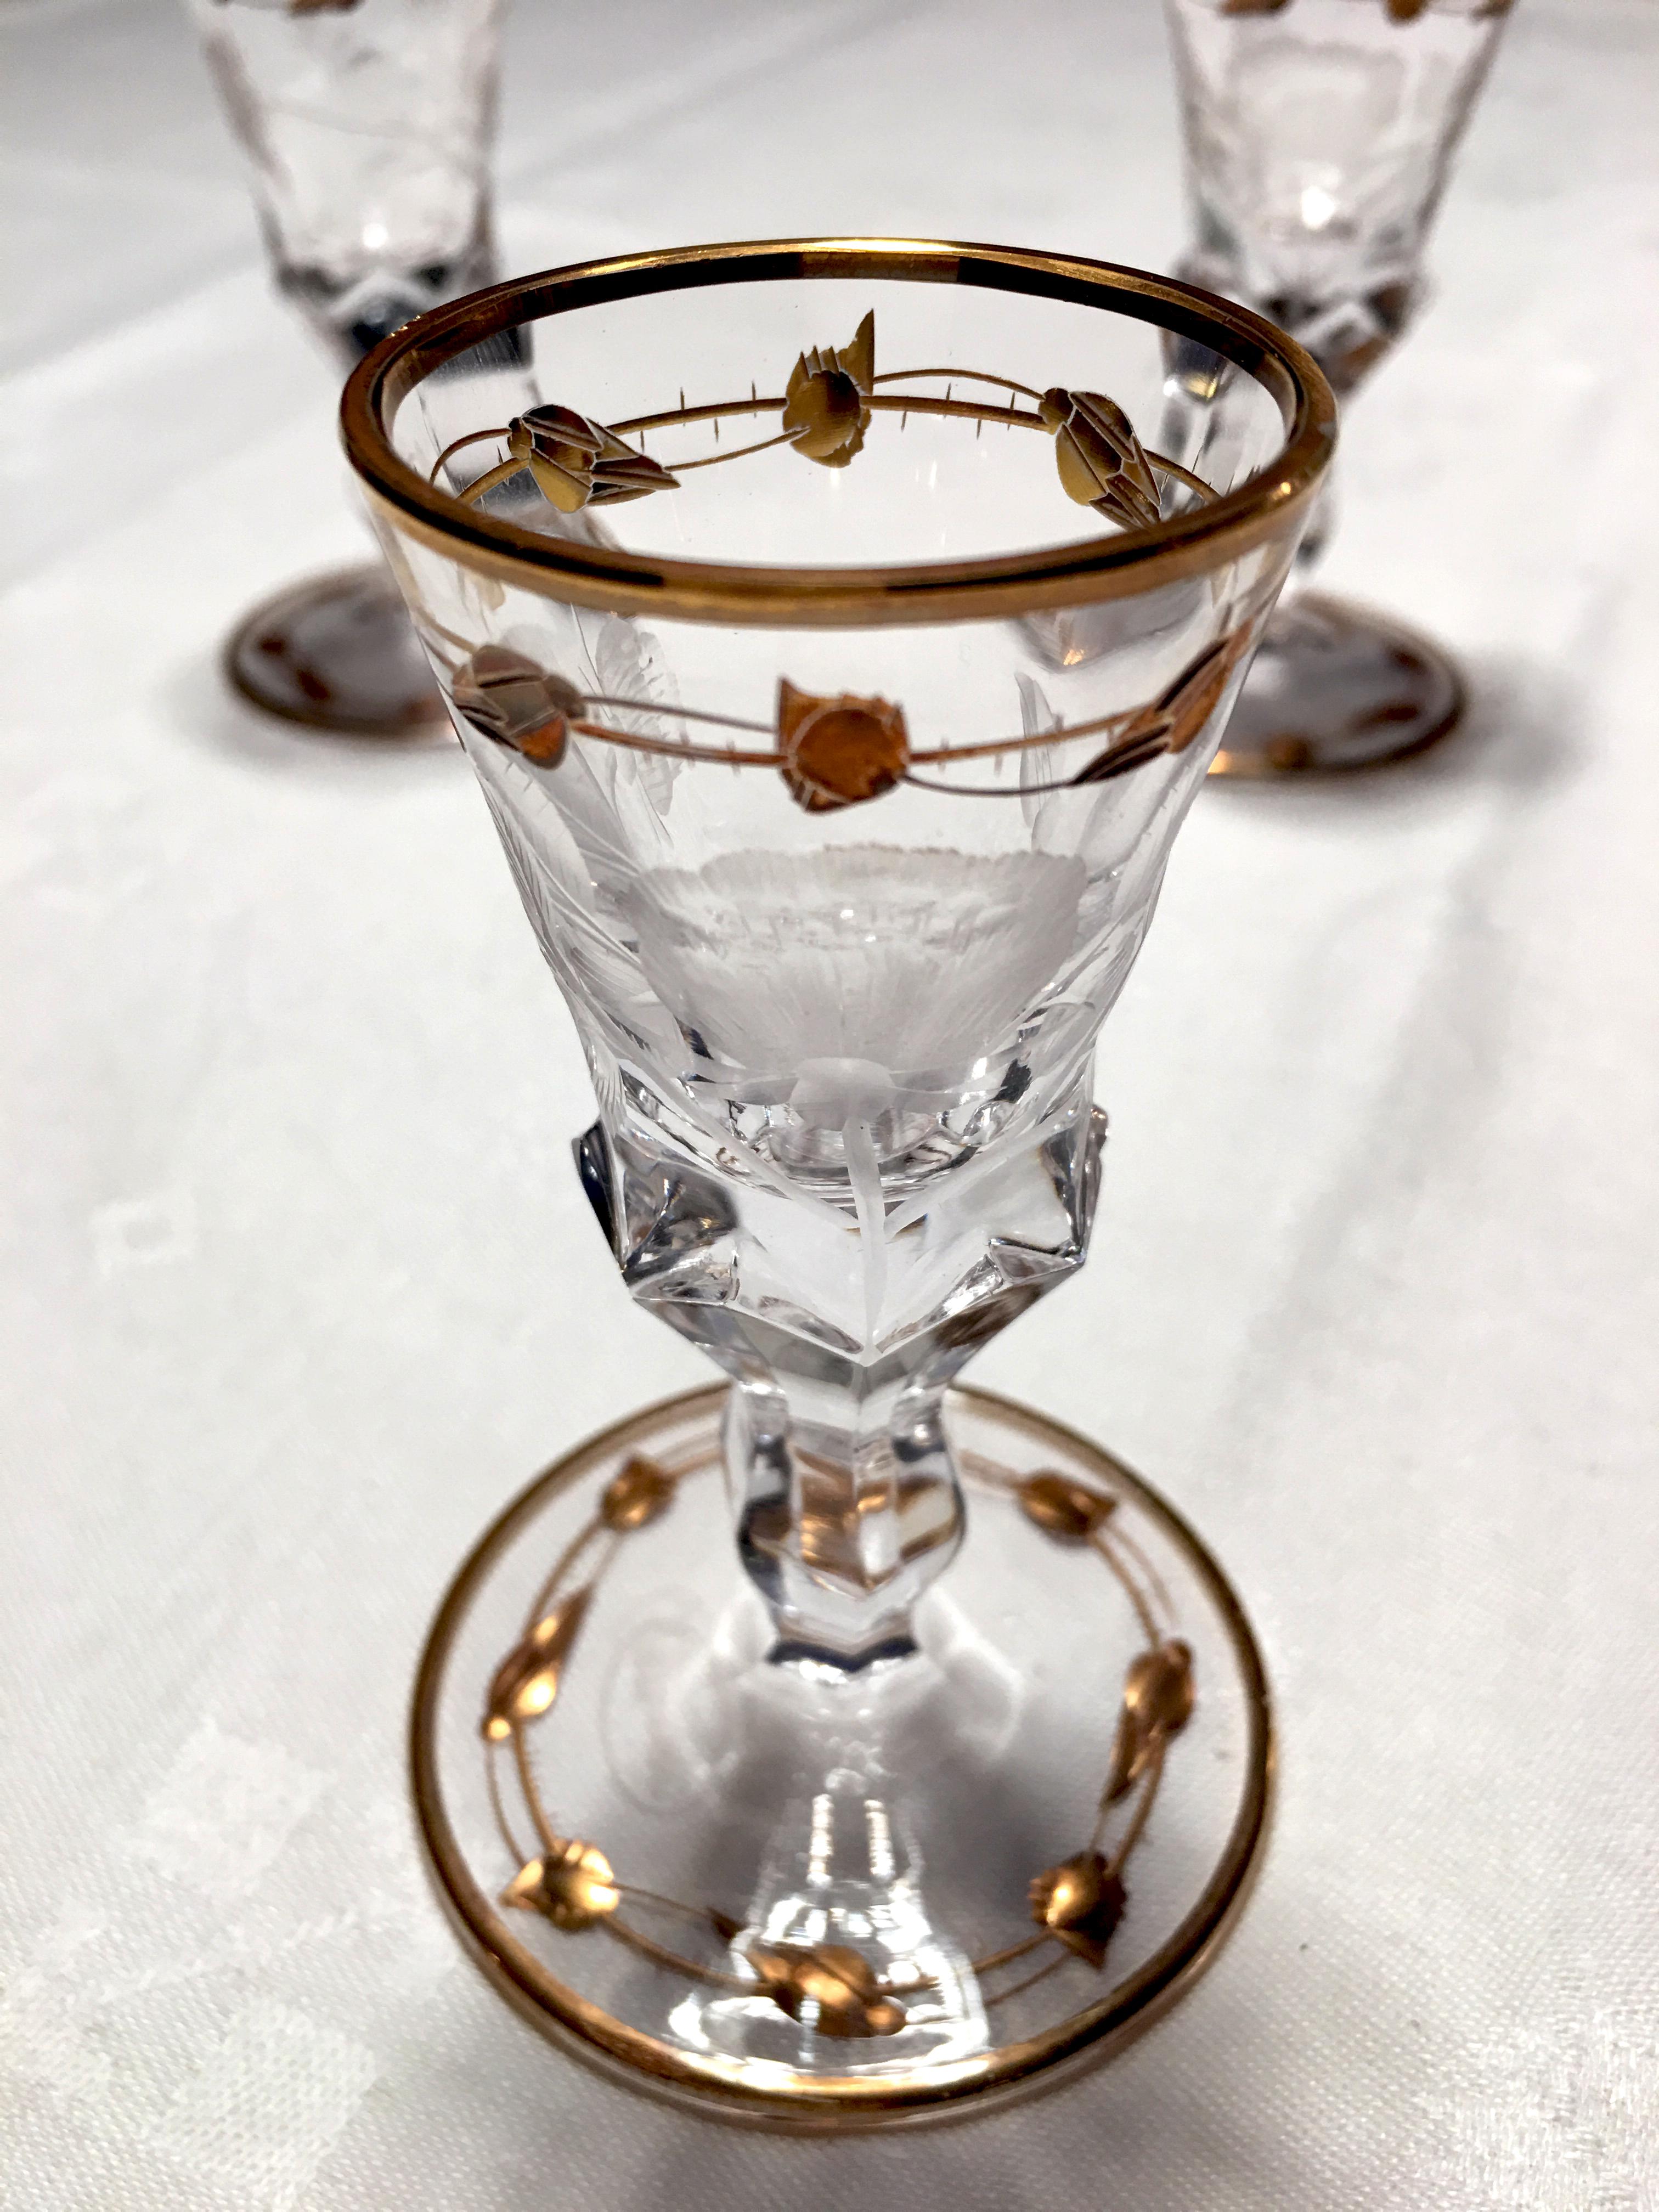 These are rare 3 shot or liquor glasses of hand blown crystal water glasses made by Moser in the ever popular Art Nouveau 